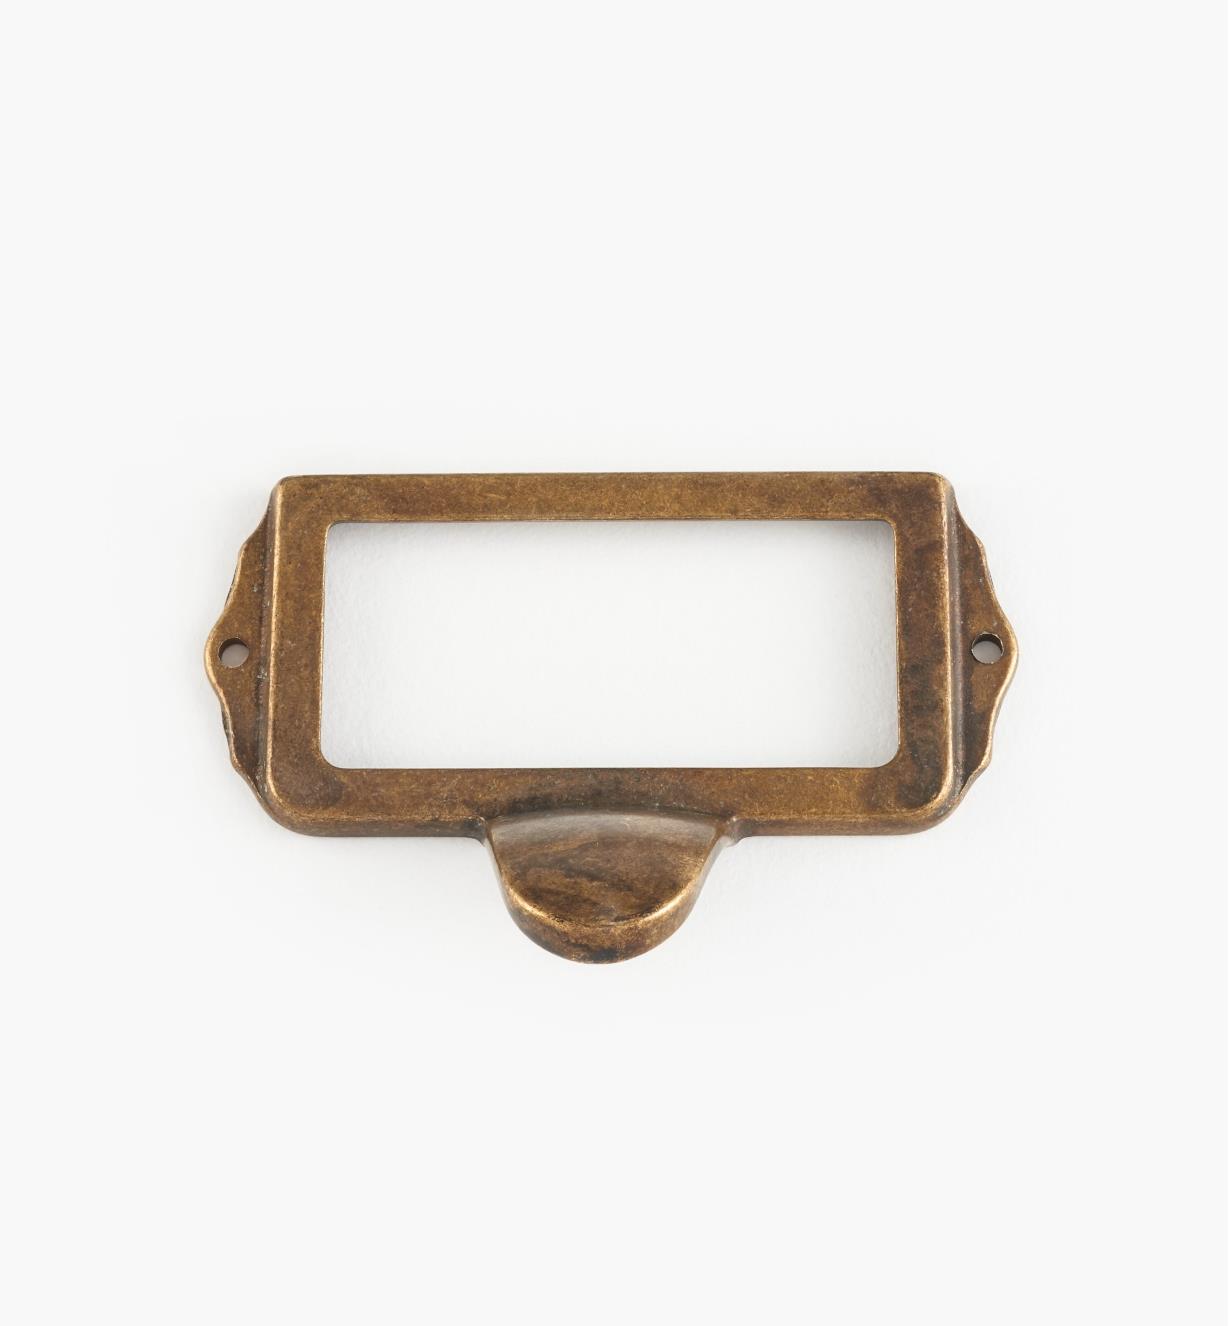 01A5751 - Old Brass Card Frame/Pull